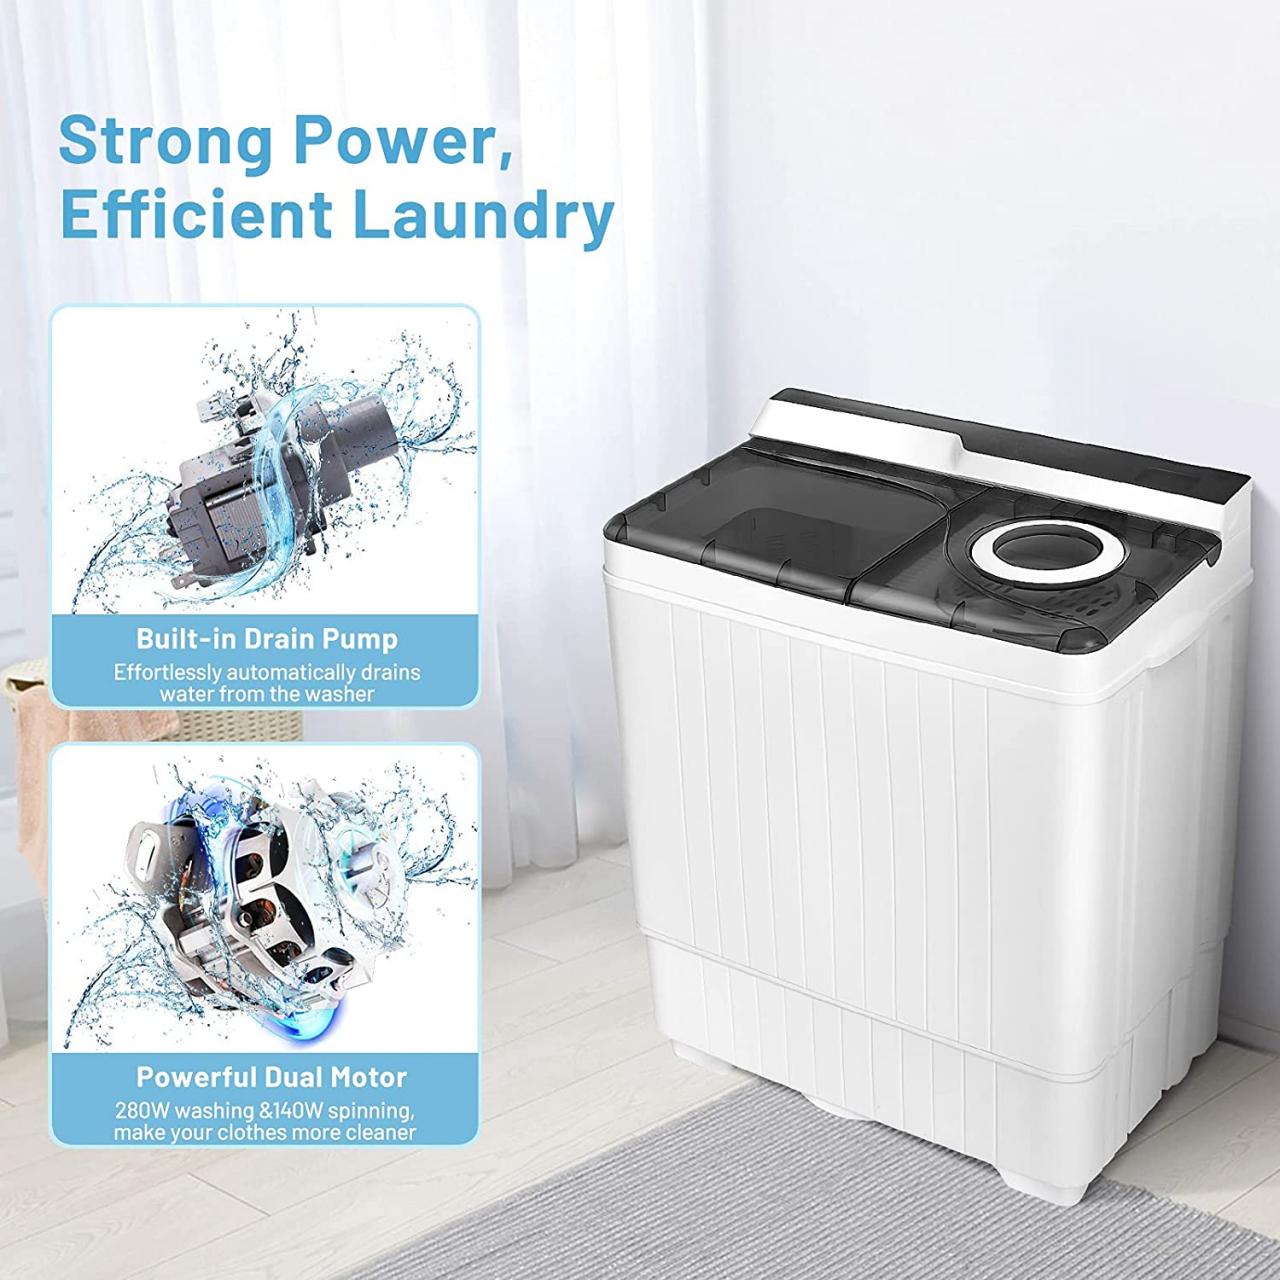 Buy Giantex Washing Machine Semi-automatic, Twin Tub Washer with Spin Dryer,  26lbs Capacity, Built-in Drain Pump, Portable Laundry Washer, Compact  Washing Machine for Apartment, Dorm and RV (White+Gray) Online in Vietnam.  B097KCMW45